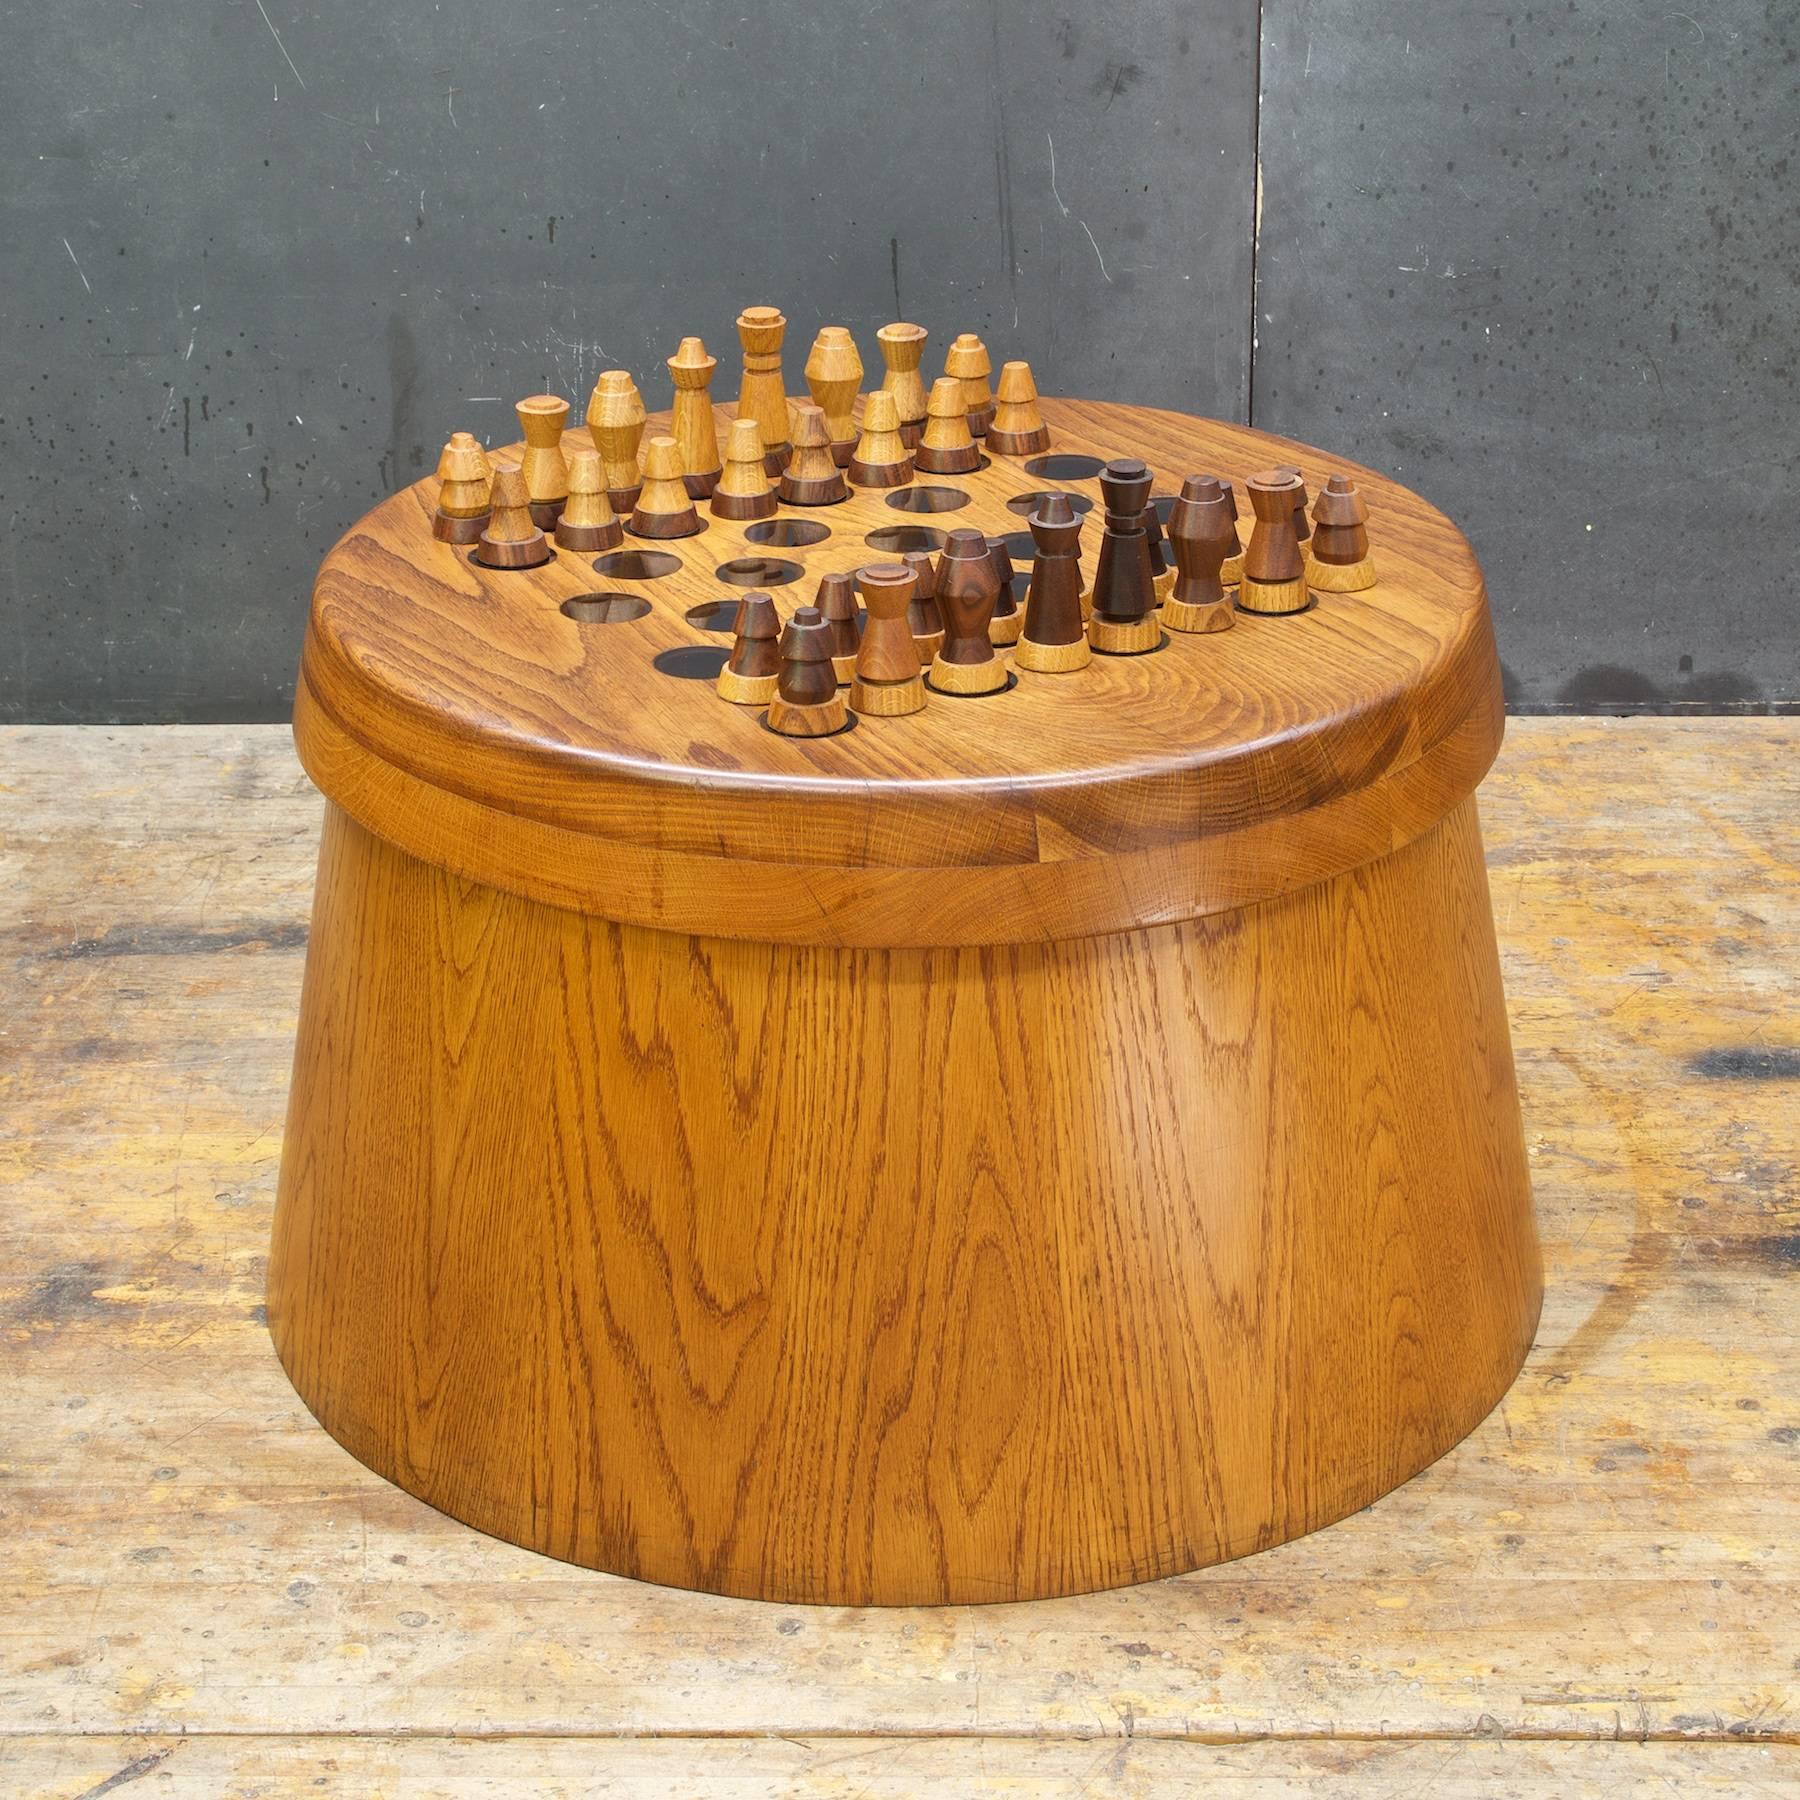 1950s, Studio Craft oak staved chessboard chess set. Amazing presence. Was meant to be illuminating, but there is no lamp inside.  Each Dot on the board is thick inset lucite. Original Chess pieces included.